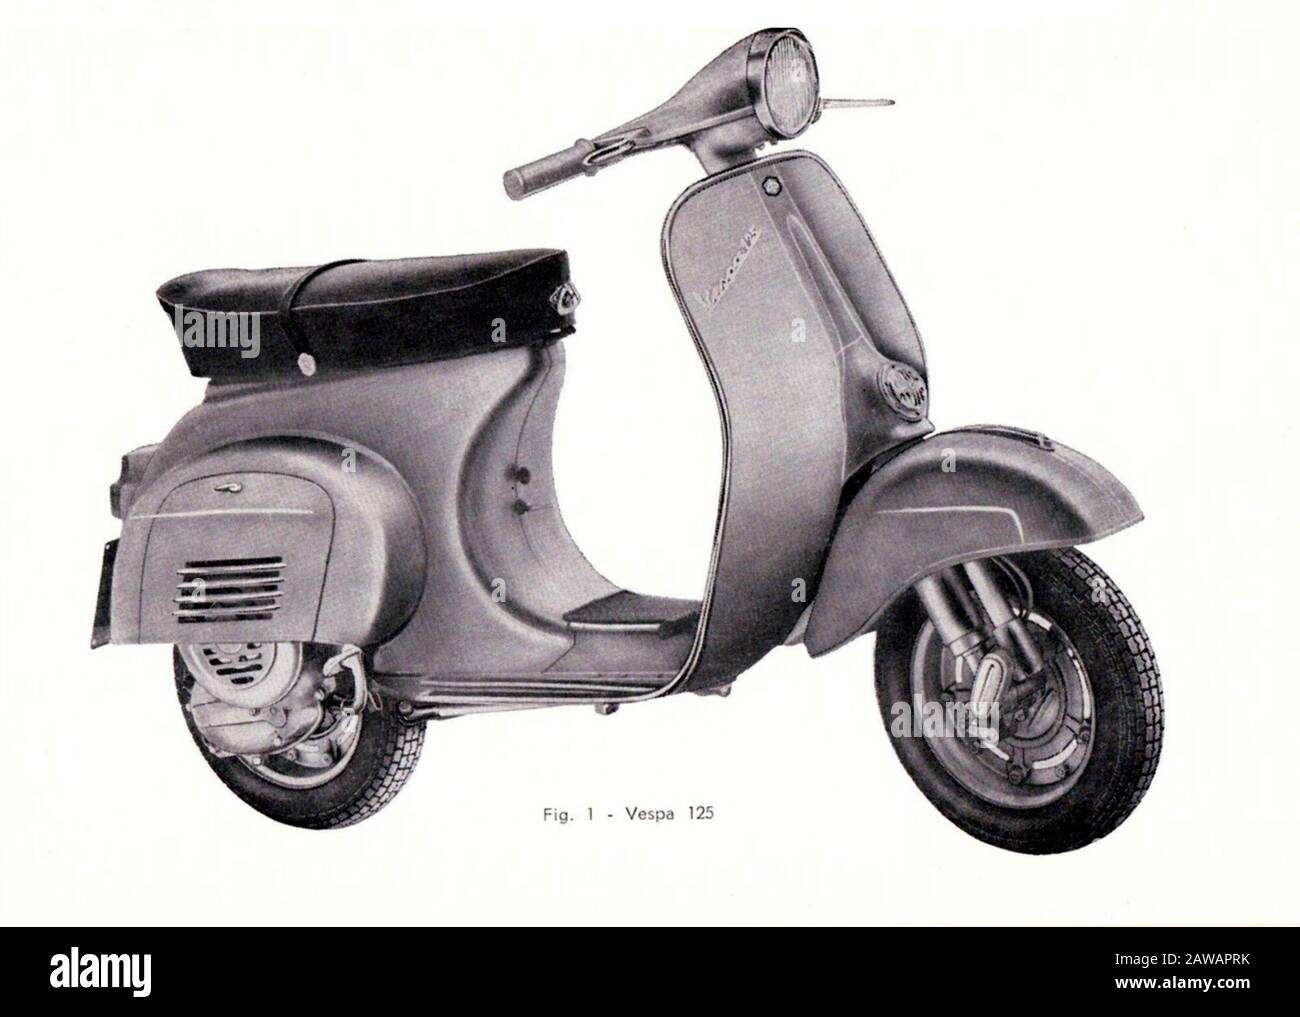 1965 , ITALY : The celebrated italian scooter NUOVA VESPA 125 by PIAGGIO  industry , photo from the Operating instructions and maintenance booklet  Stock Photo - Alamy